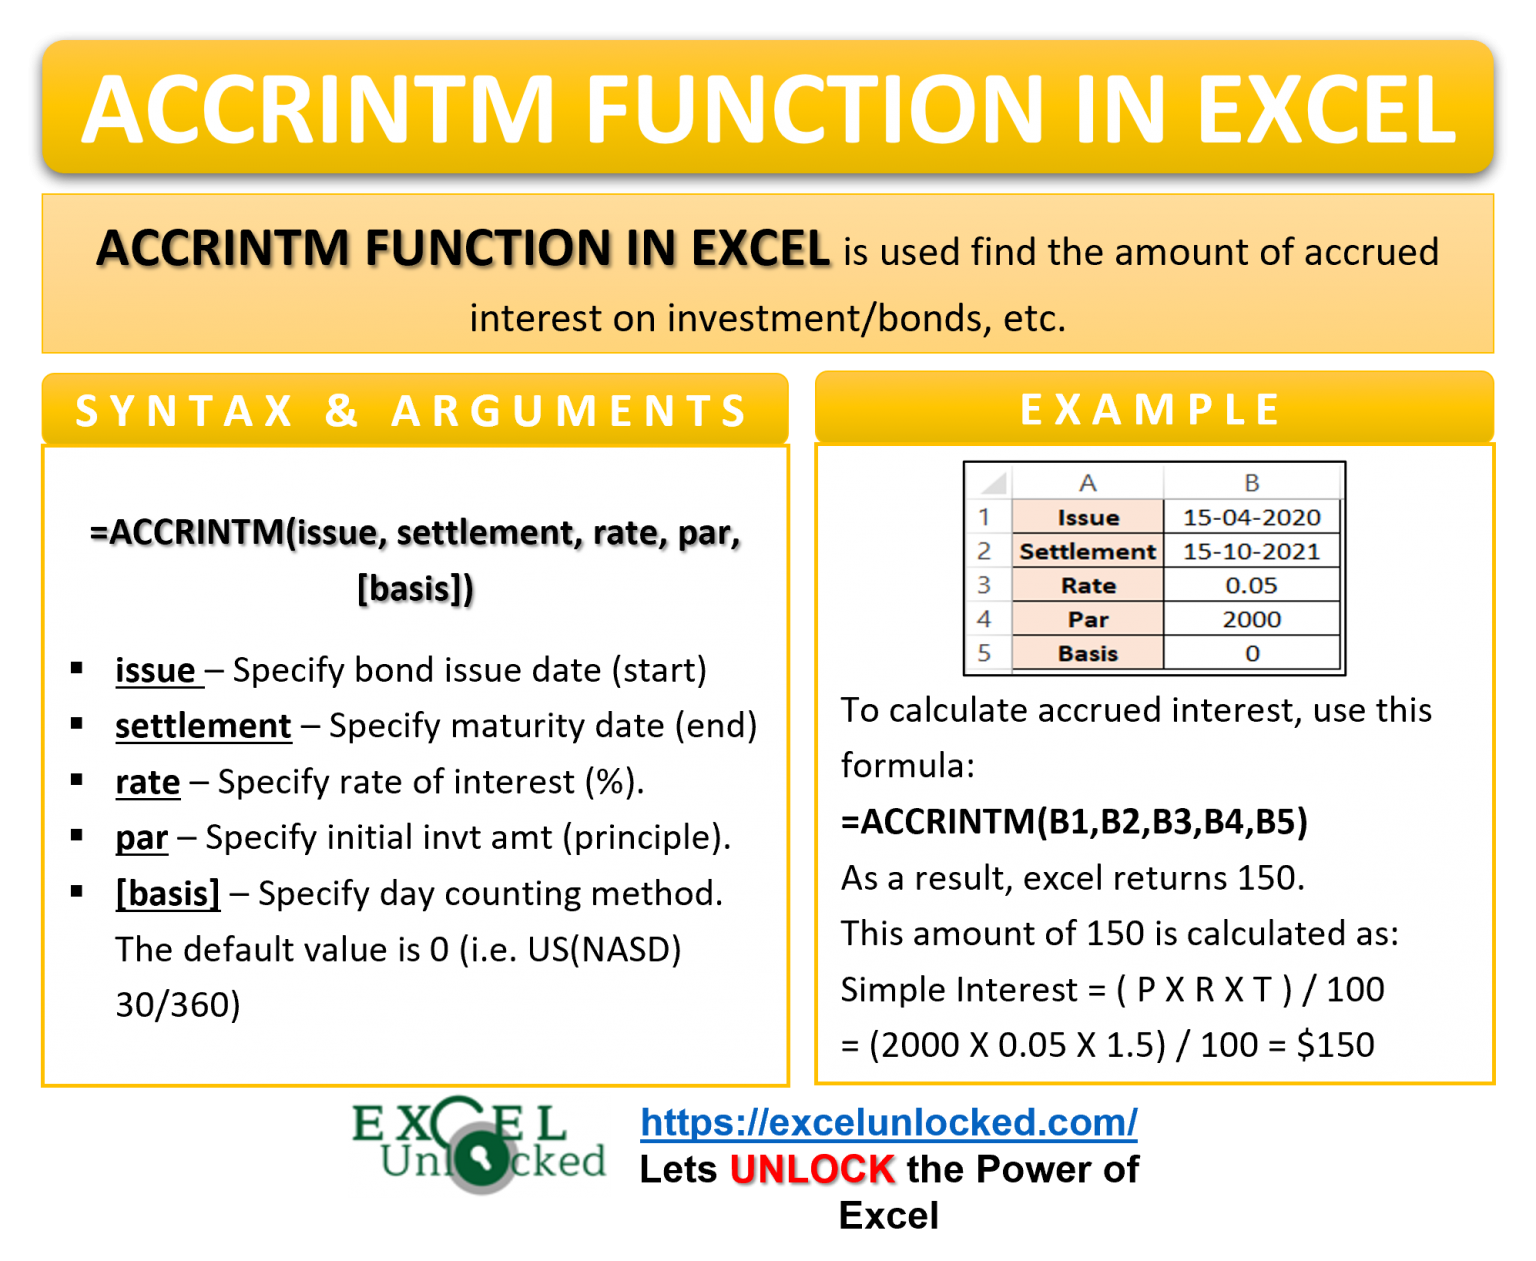 accrintm-function-of-excel-finding-accrued-interest-excel-unlocked